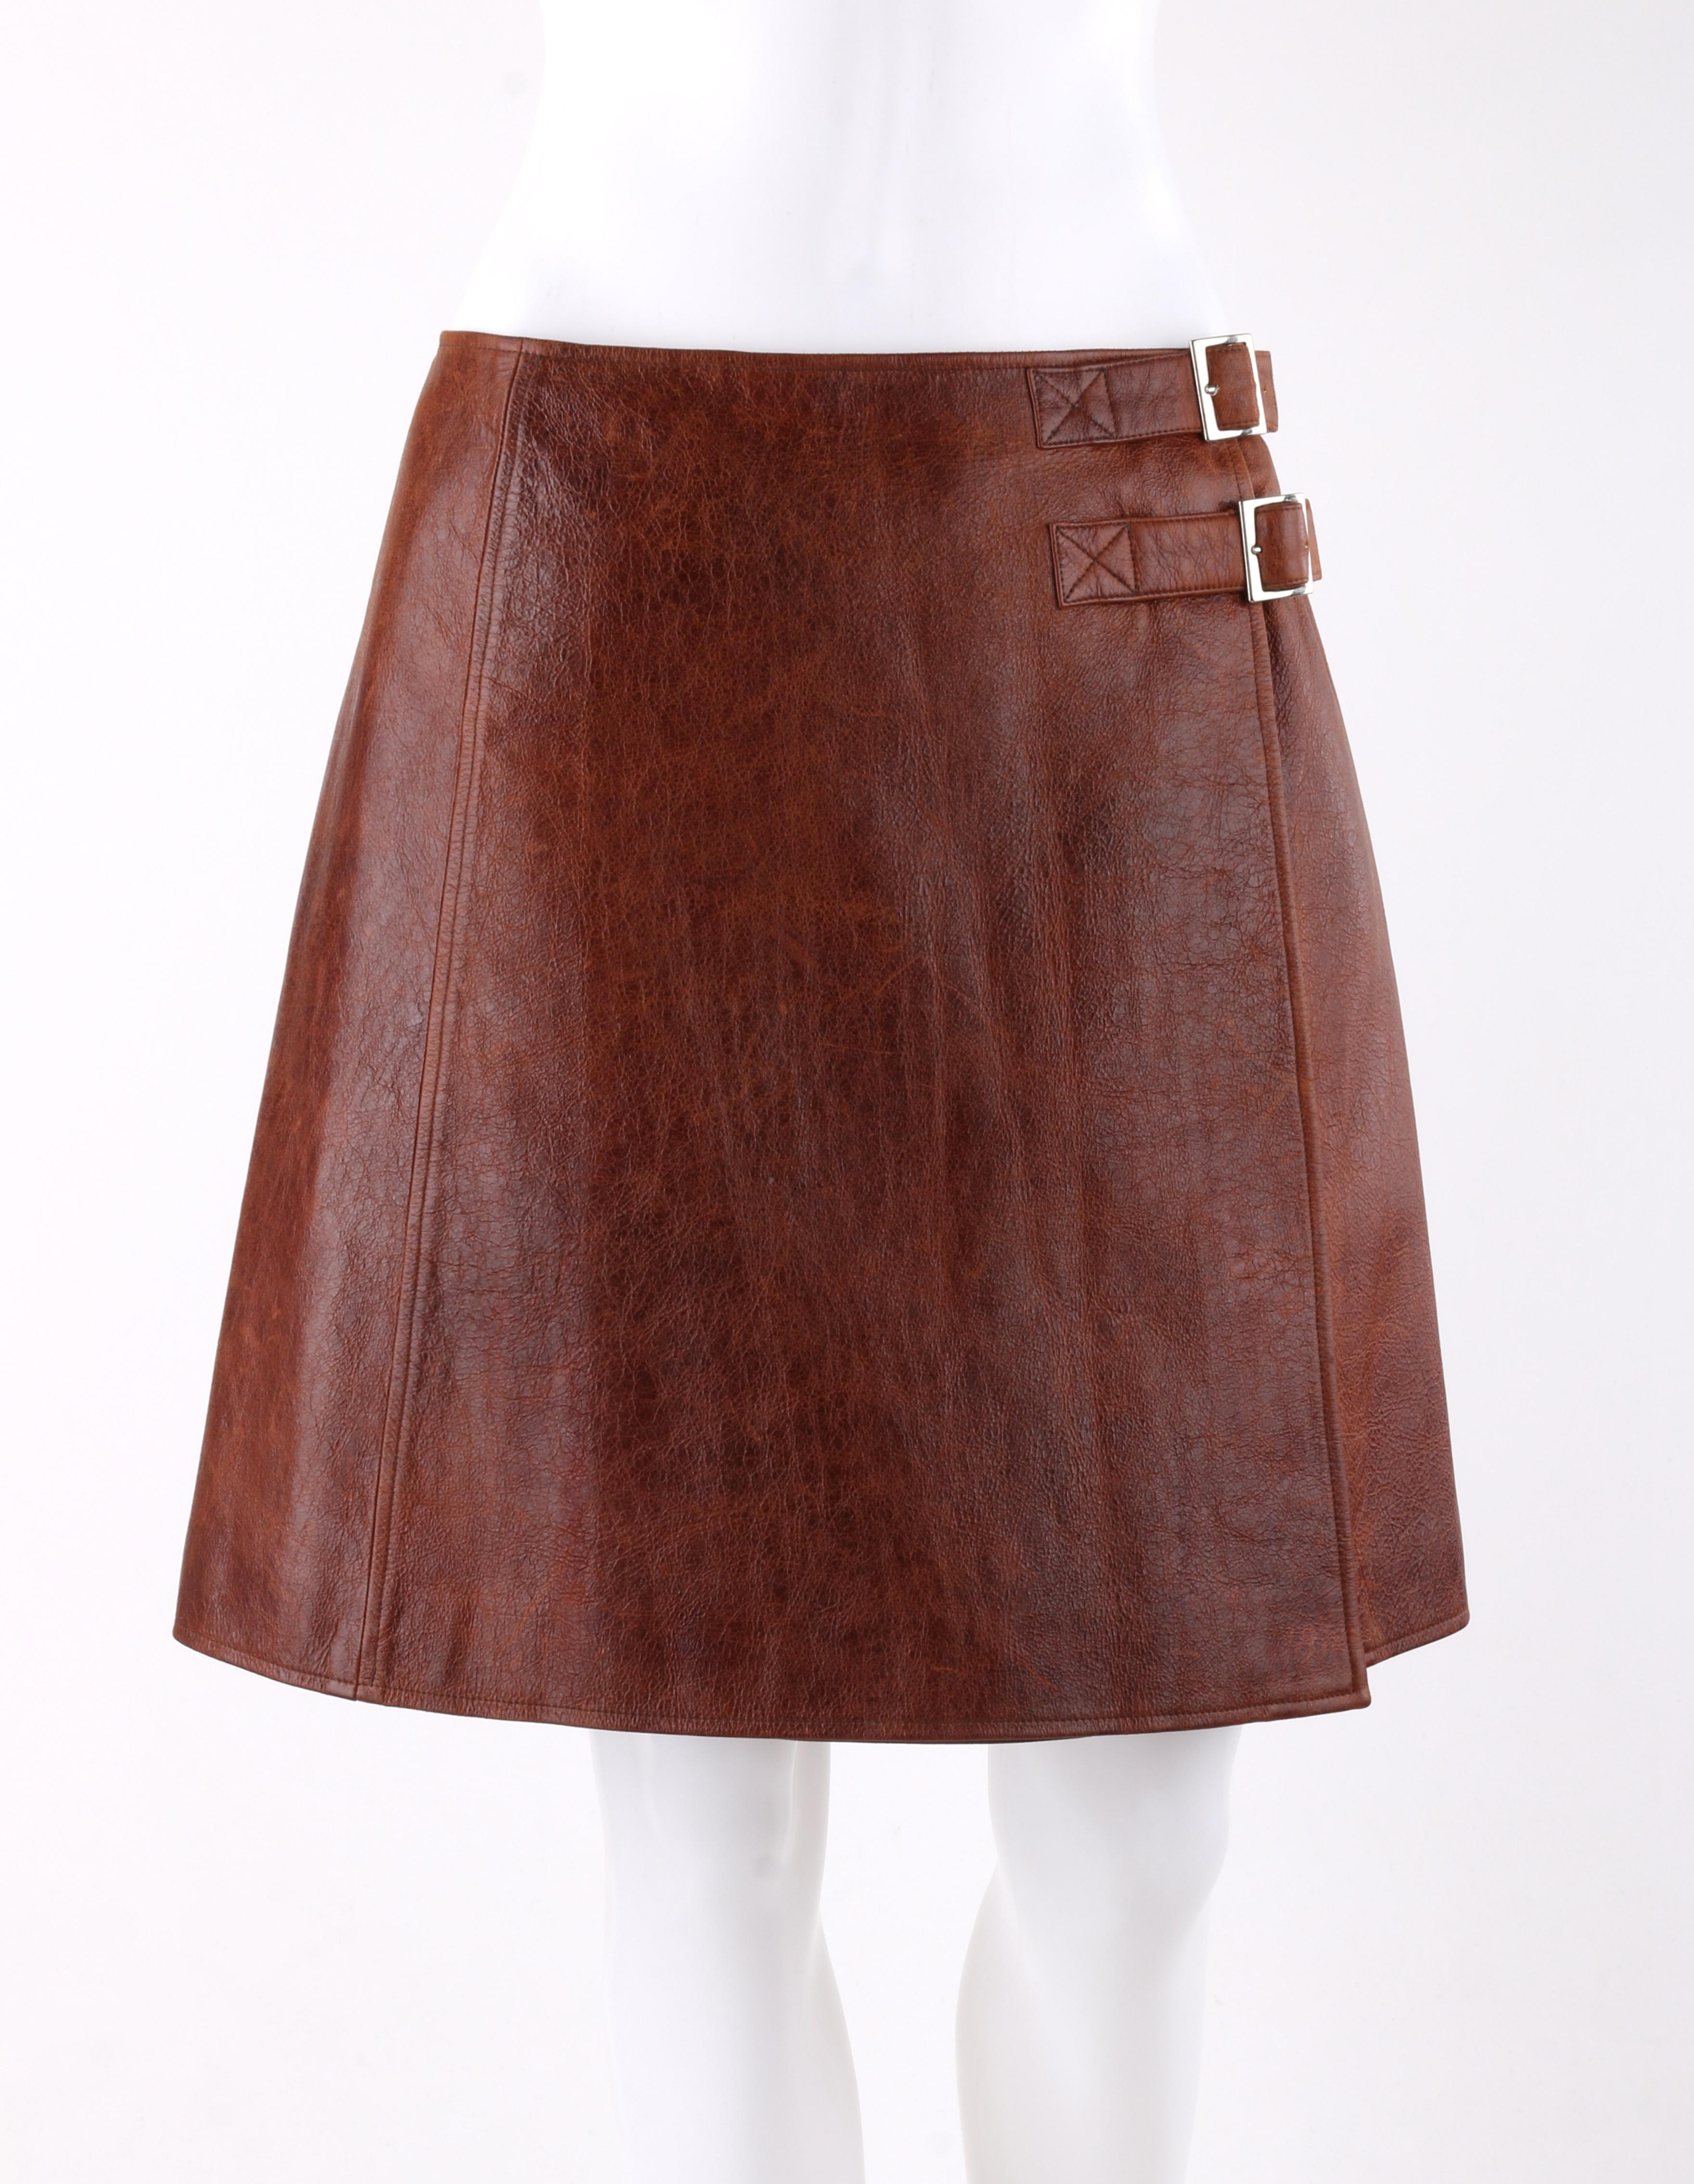 PACO RABANNE Sienna Brown Lamb Leather Dual Buckle A-Line Wrap Skirt
 
Brand / Manufacturer: Paco Rabanne 
Style: Wrap Skirt
Color(s): Brown
Lined: Yes      
Marked Fabric Content: Composition: 100% Lamb; Lining: 100% Acetate 
Additional Details /